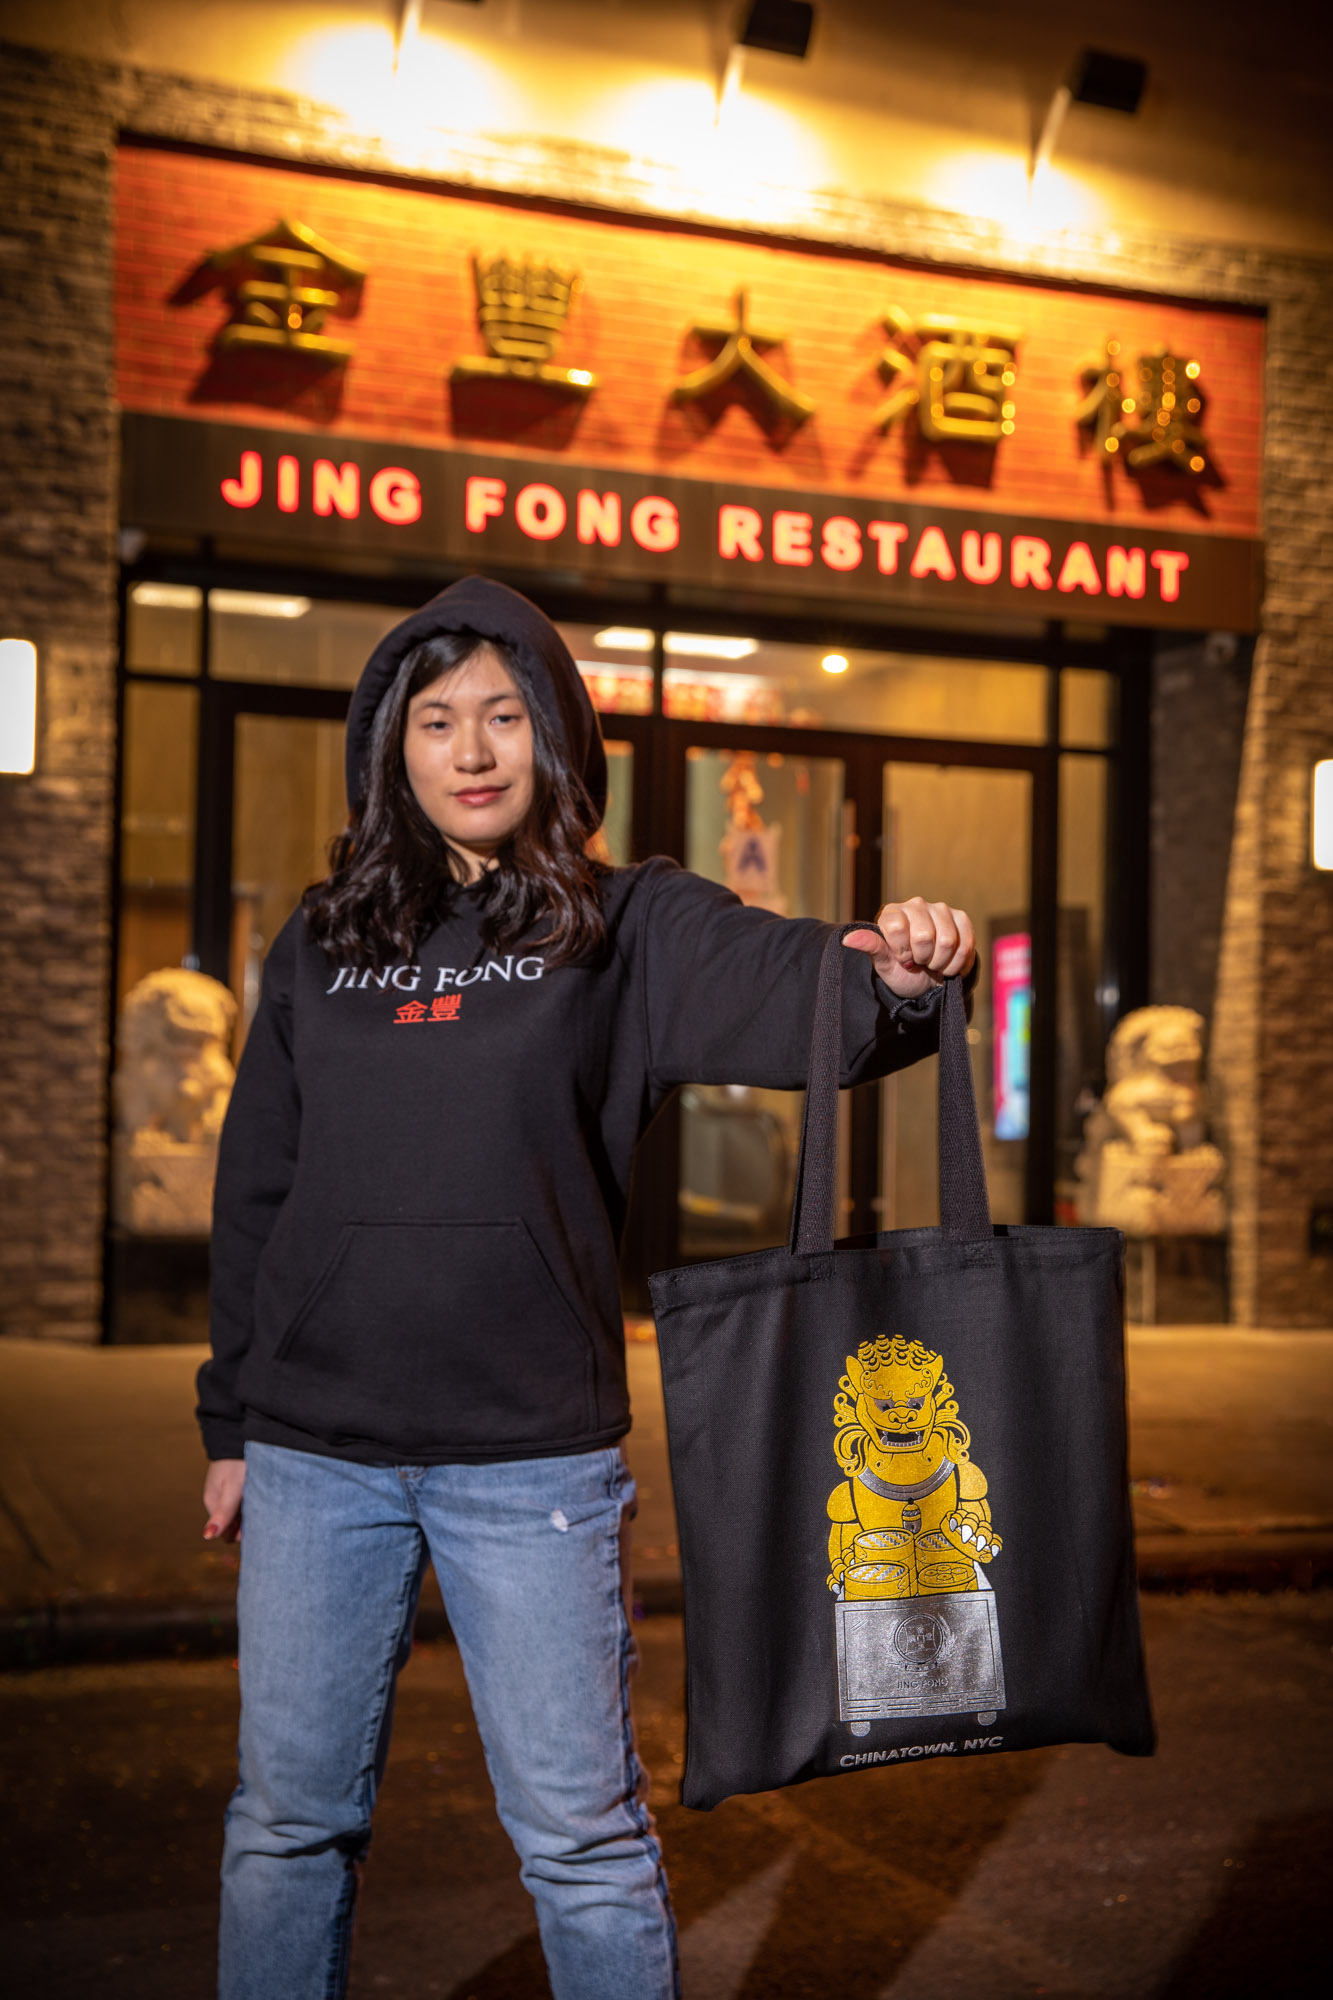 Posing outside of Jing Fong restaurant in NYC